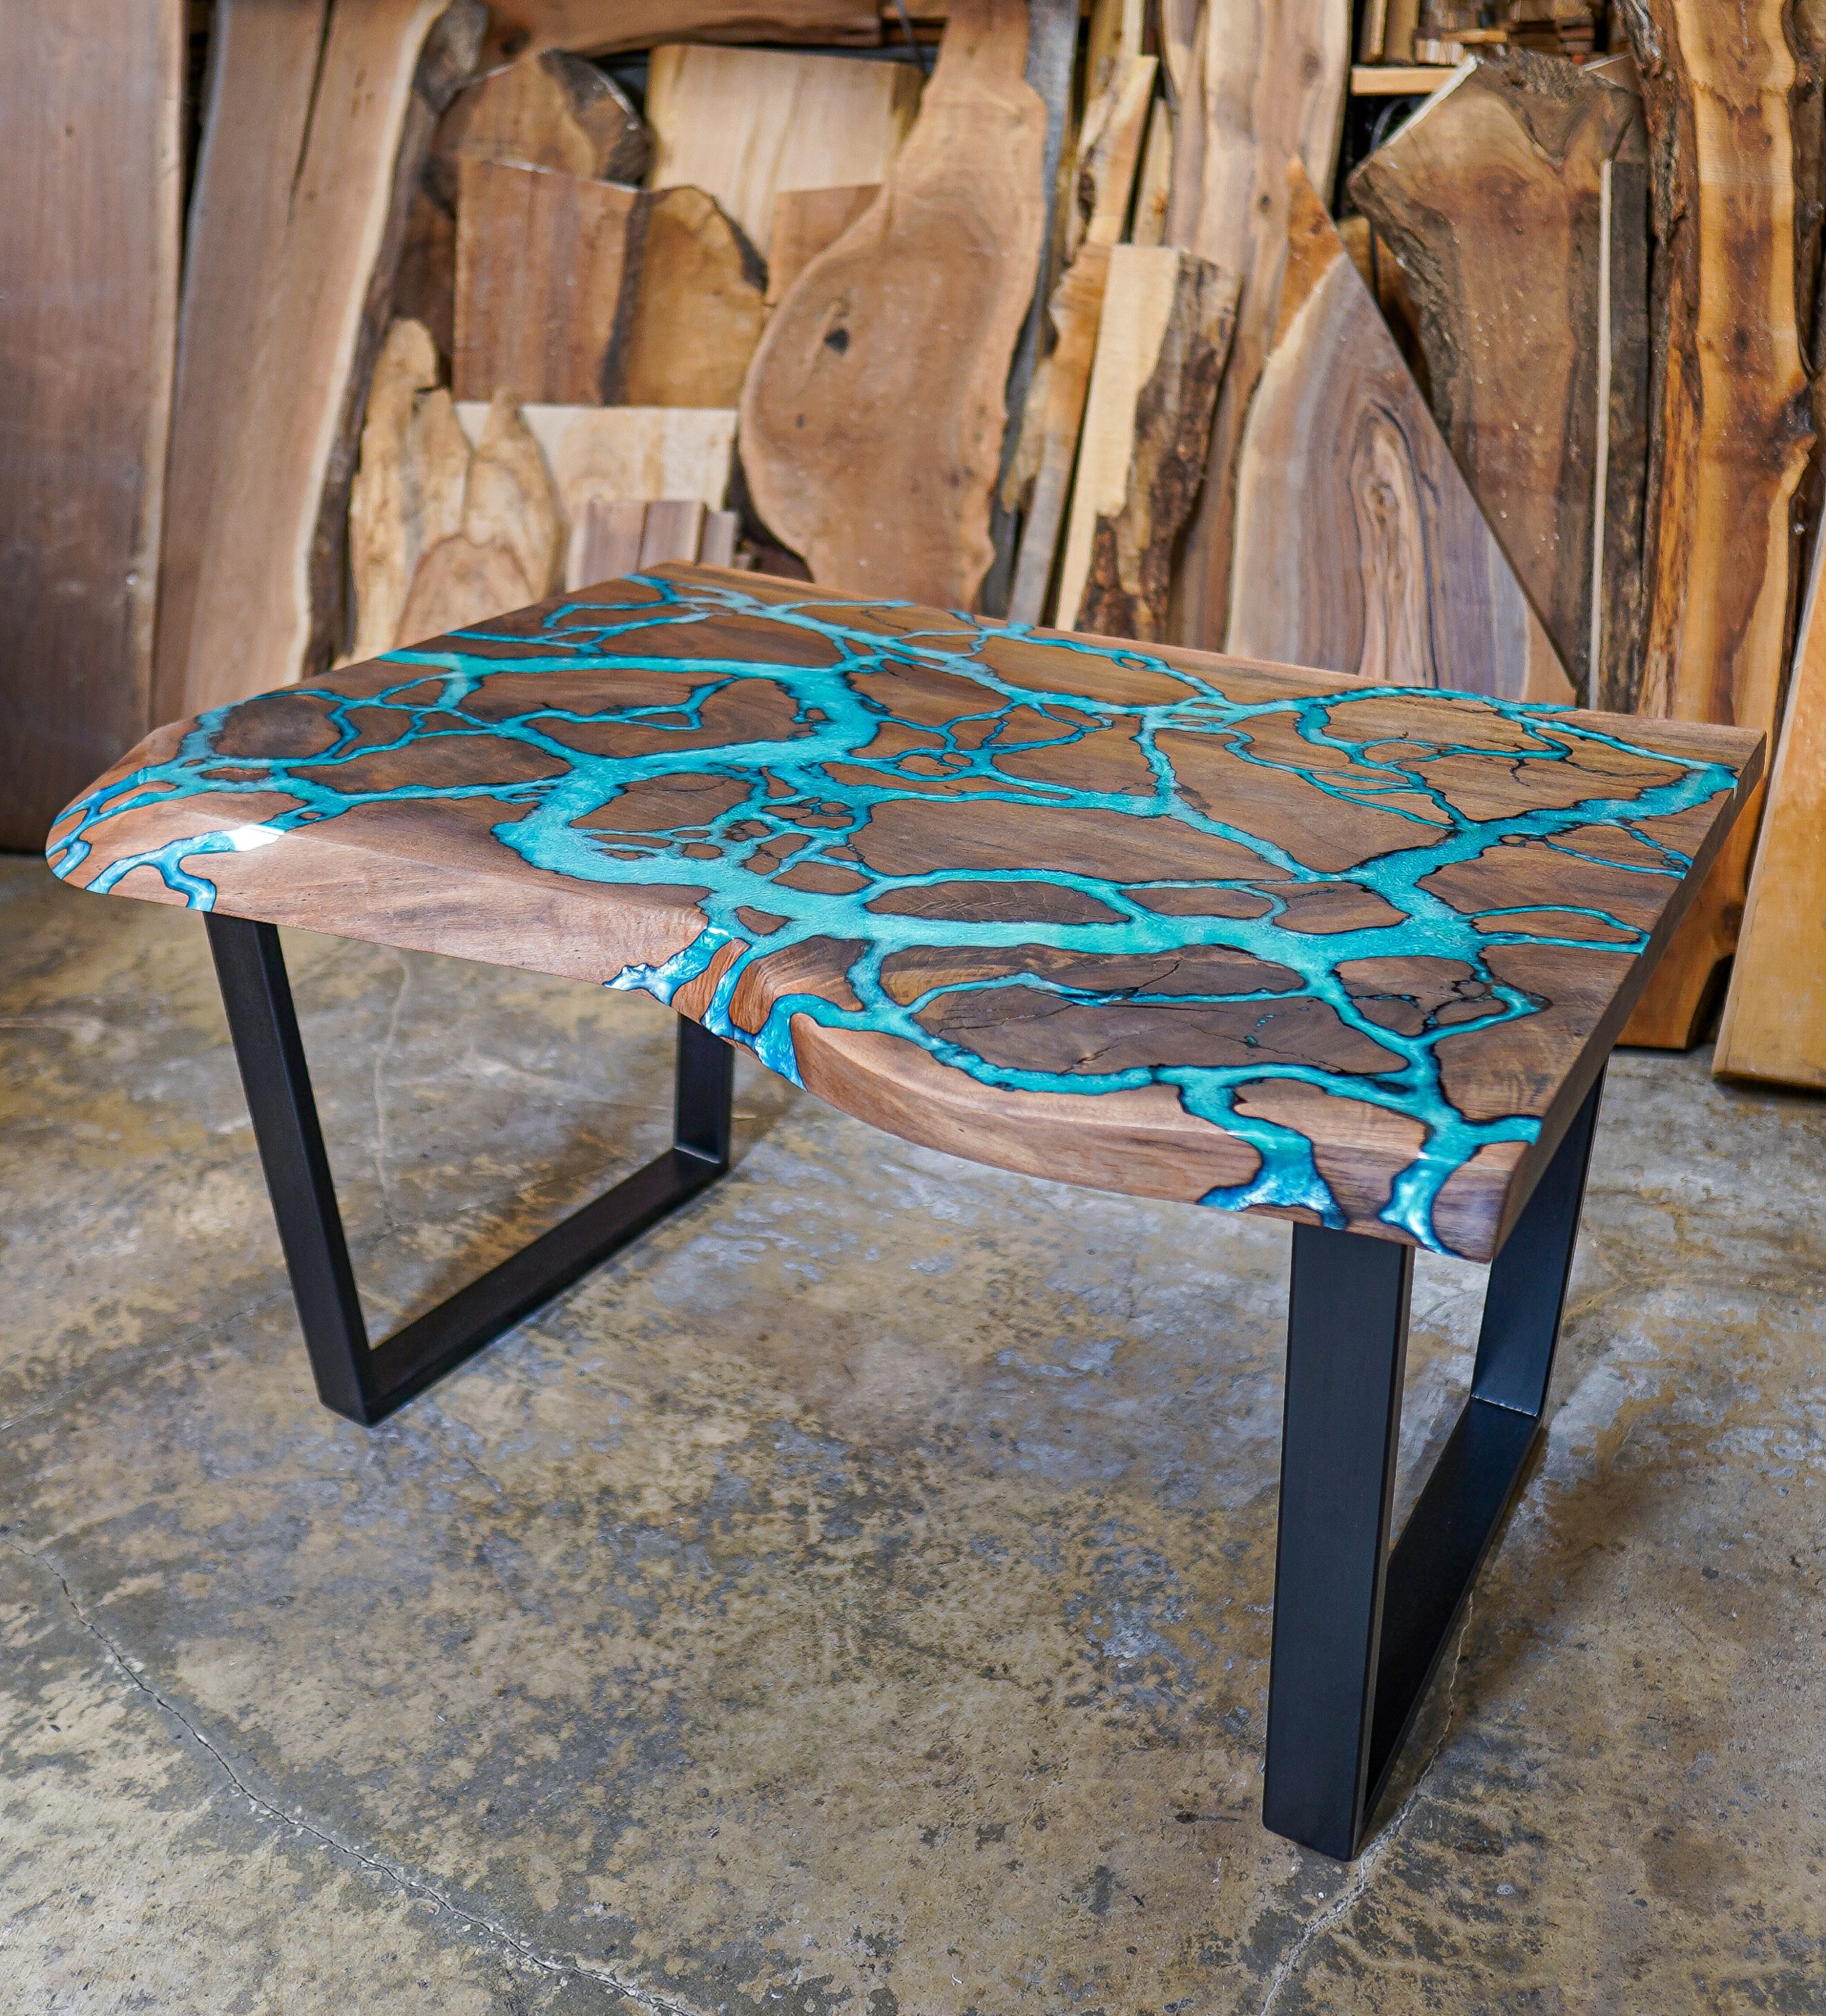 Handmade Fractal River Dining Table, How To Make A Live Edge River Dining Table